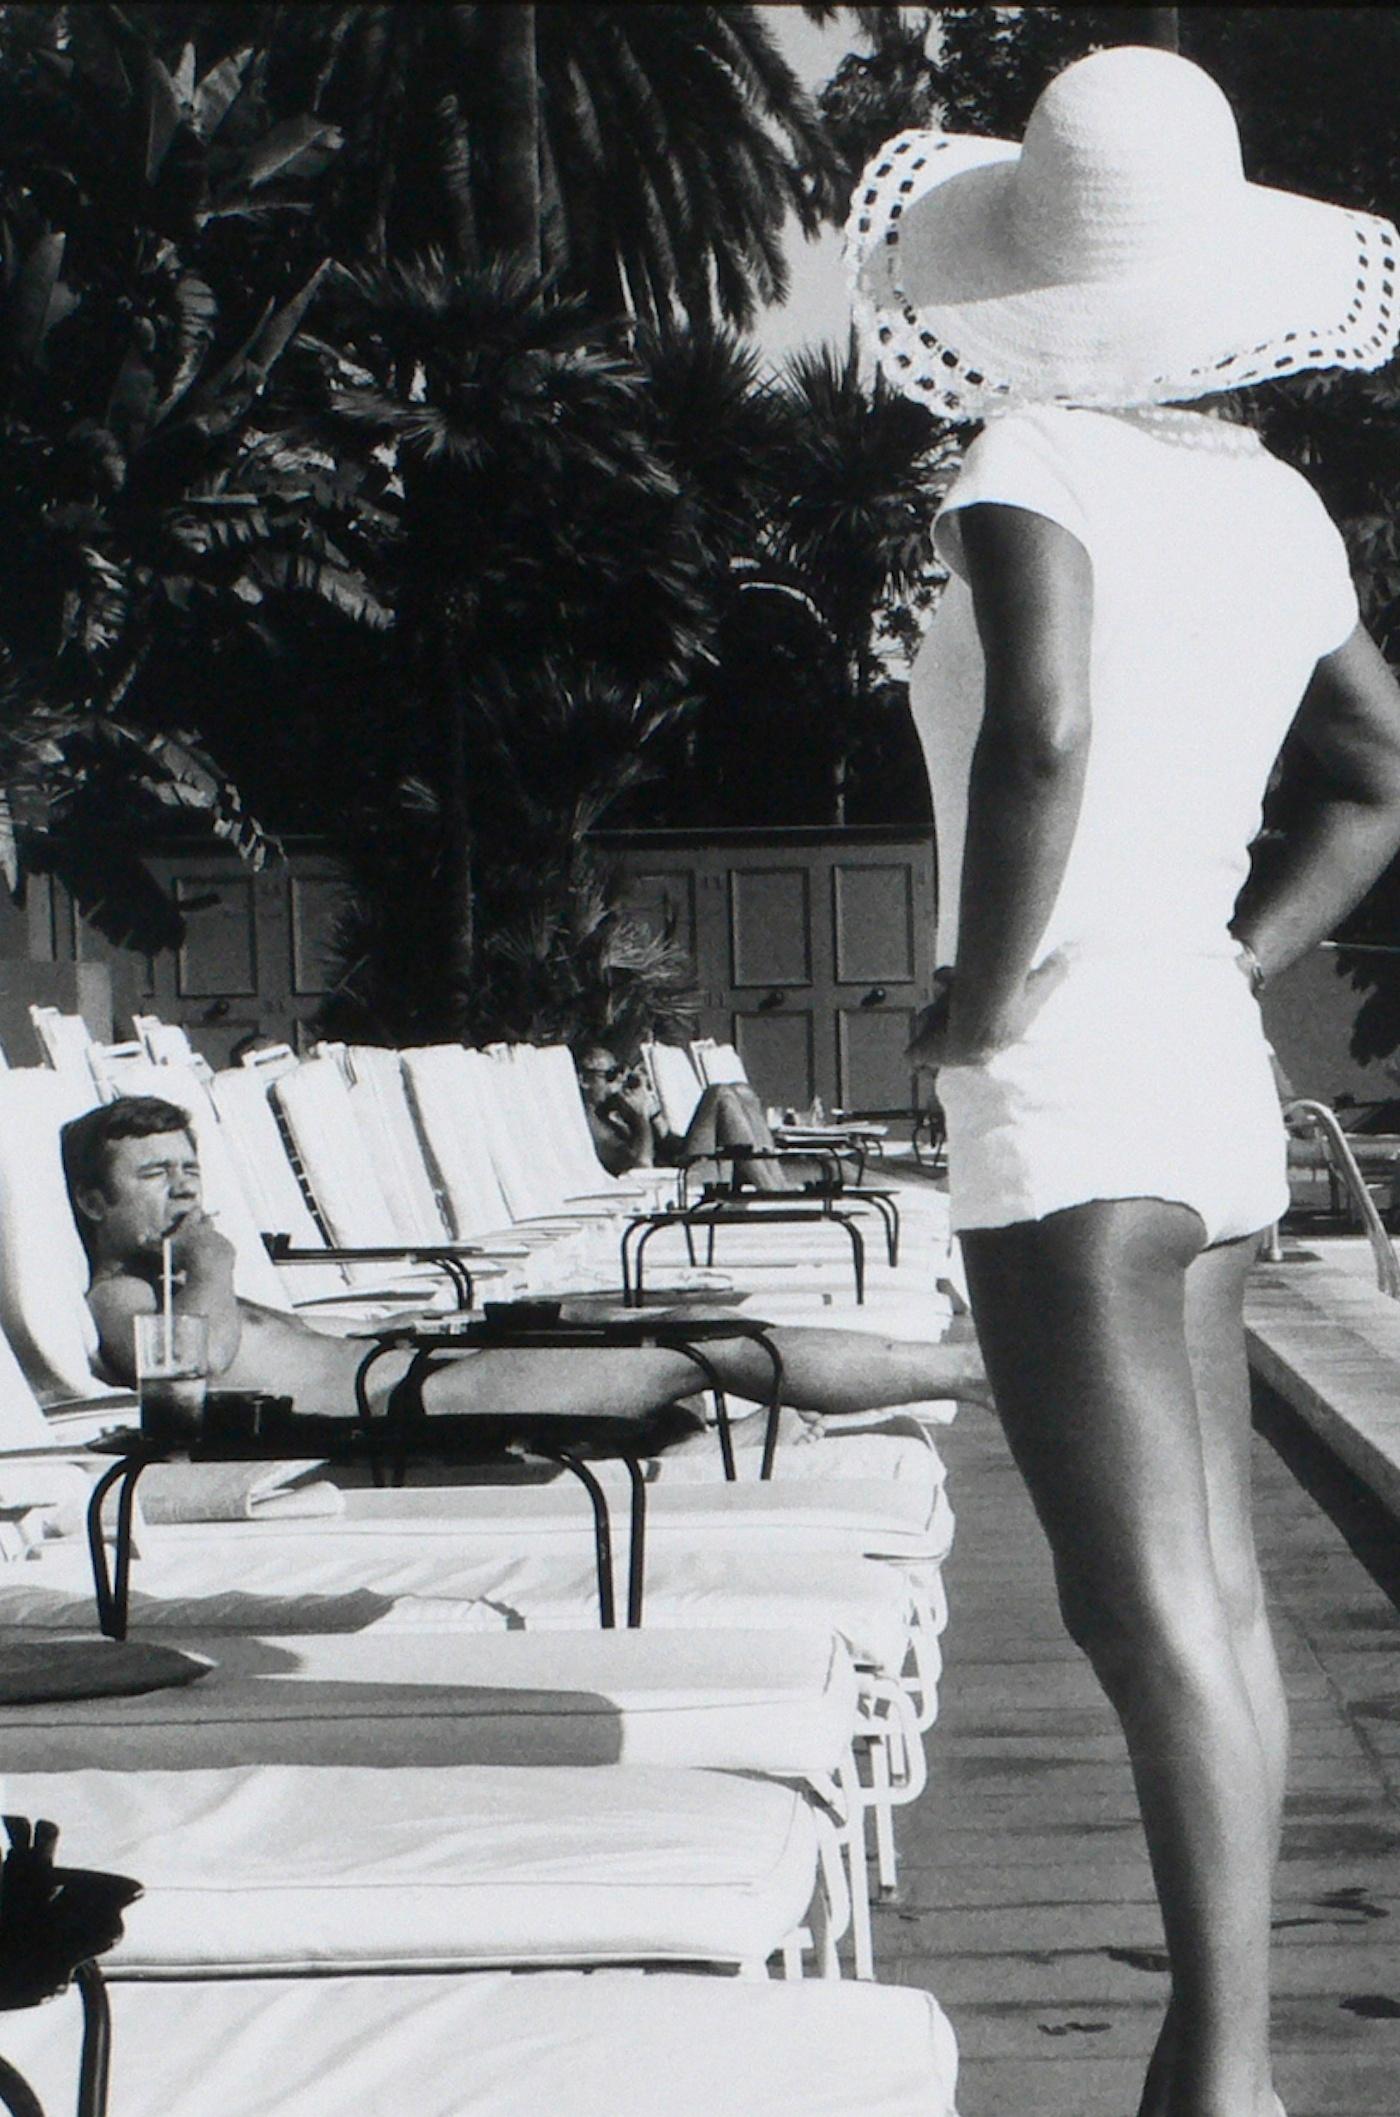 Anthony FRIEDKIN (*1949, America)
Woman by the Pool, Beverly Hills Hotel, Beverly Hills, California, U.S.A., 1975
Silver Gelatin Print, later print
Image 76,2 x 114,3 cm (30 x 45 in.)
Sheet 96,2 x 134,3 cm (38 x 52 3/4 in.)
Edition of 25
Print